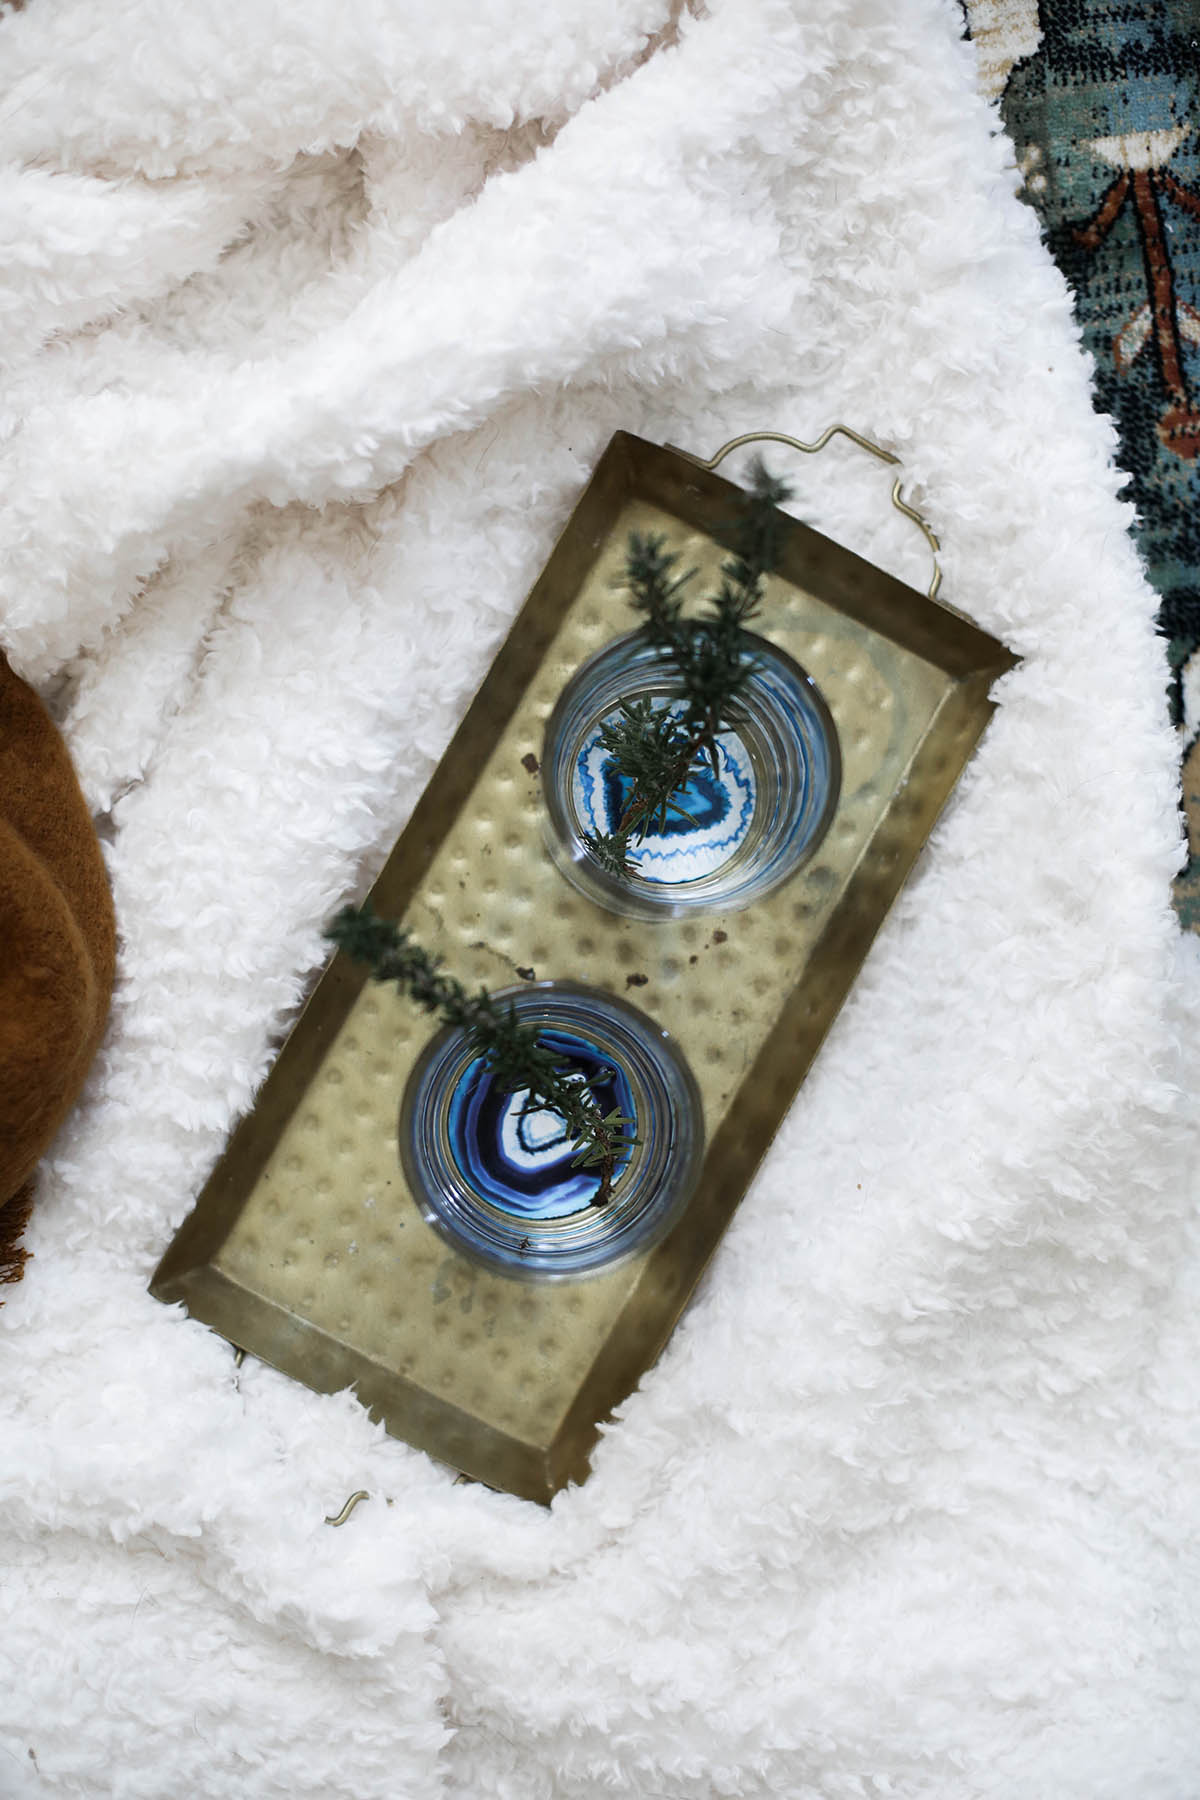 urban outfitters geode bottom glasses with gold tray and fleece throw blanket